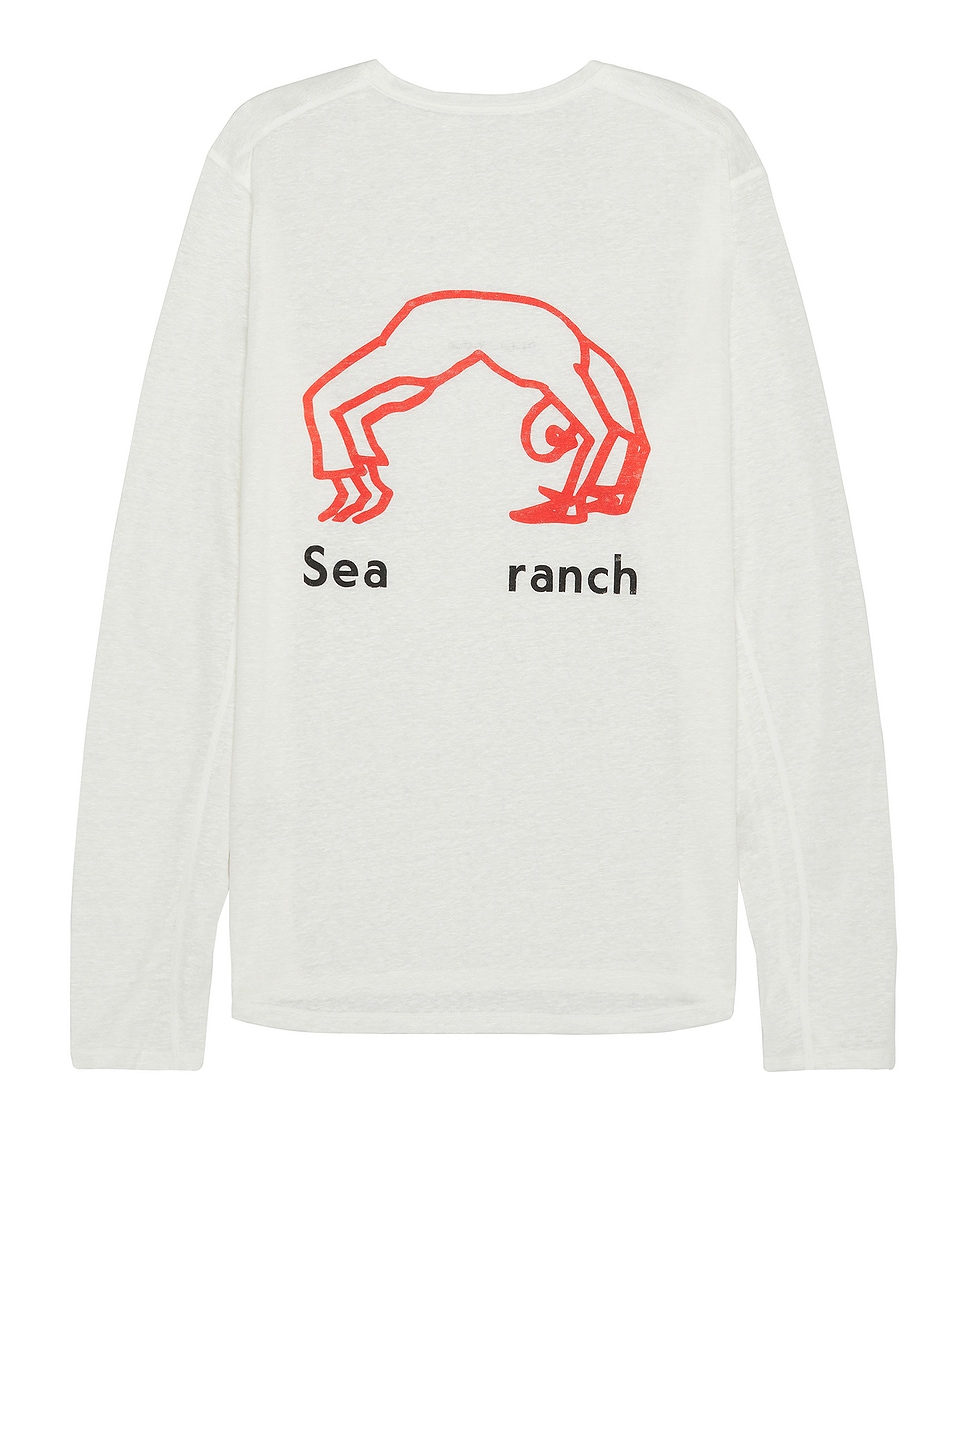 Image 1 of District Vision Hemp Long Sleeve T Shirt in Sea Ranch White